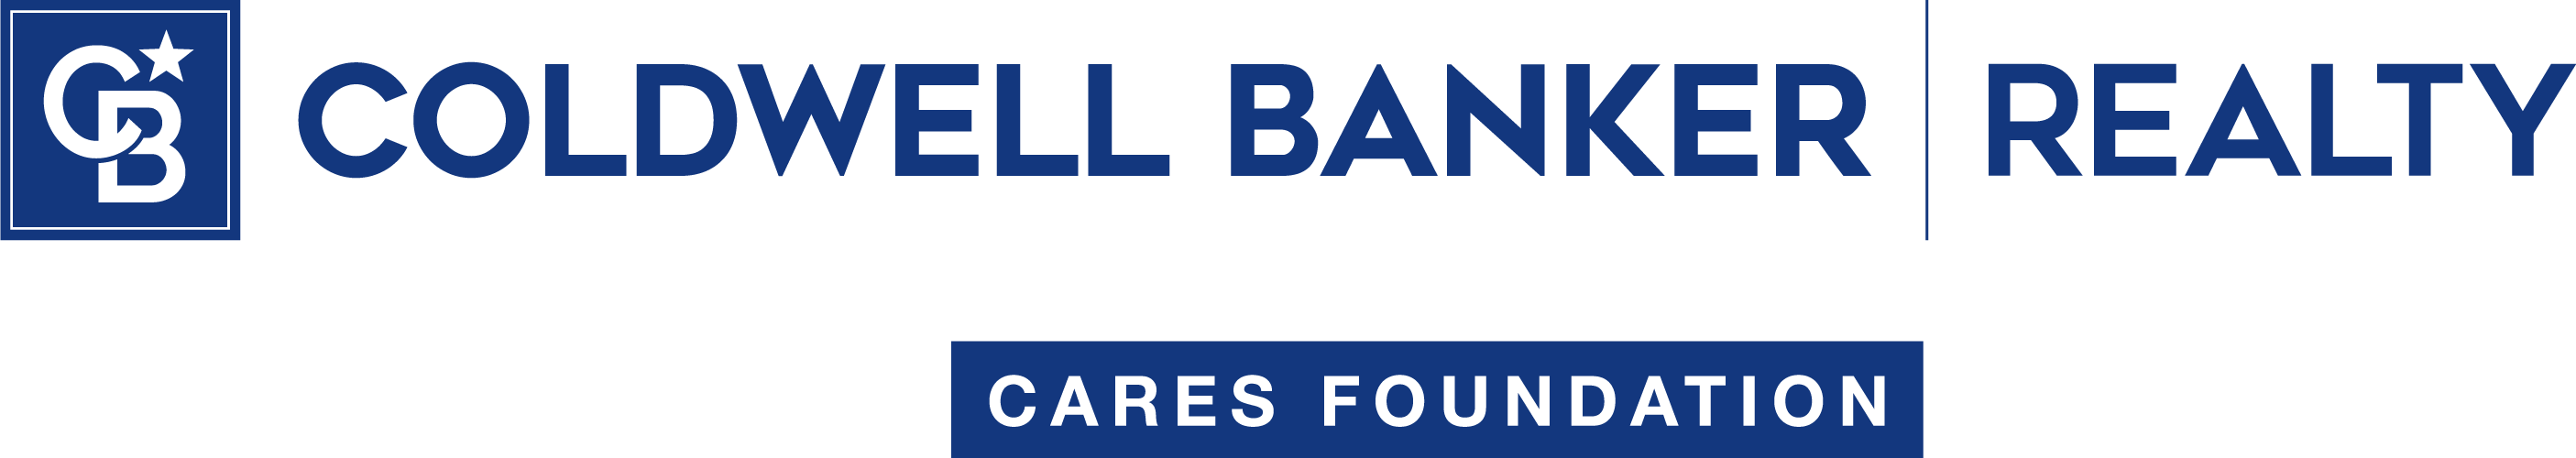 Coldwell Banker Realty Cares Foundation